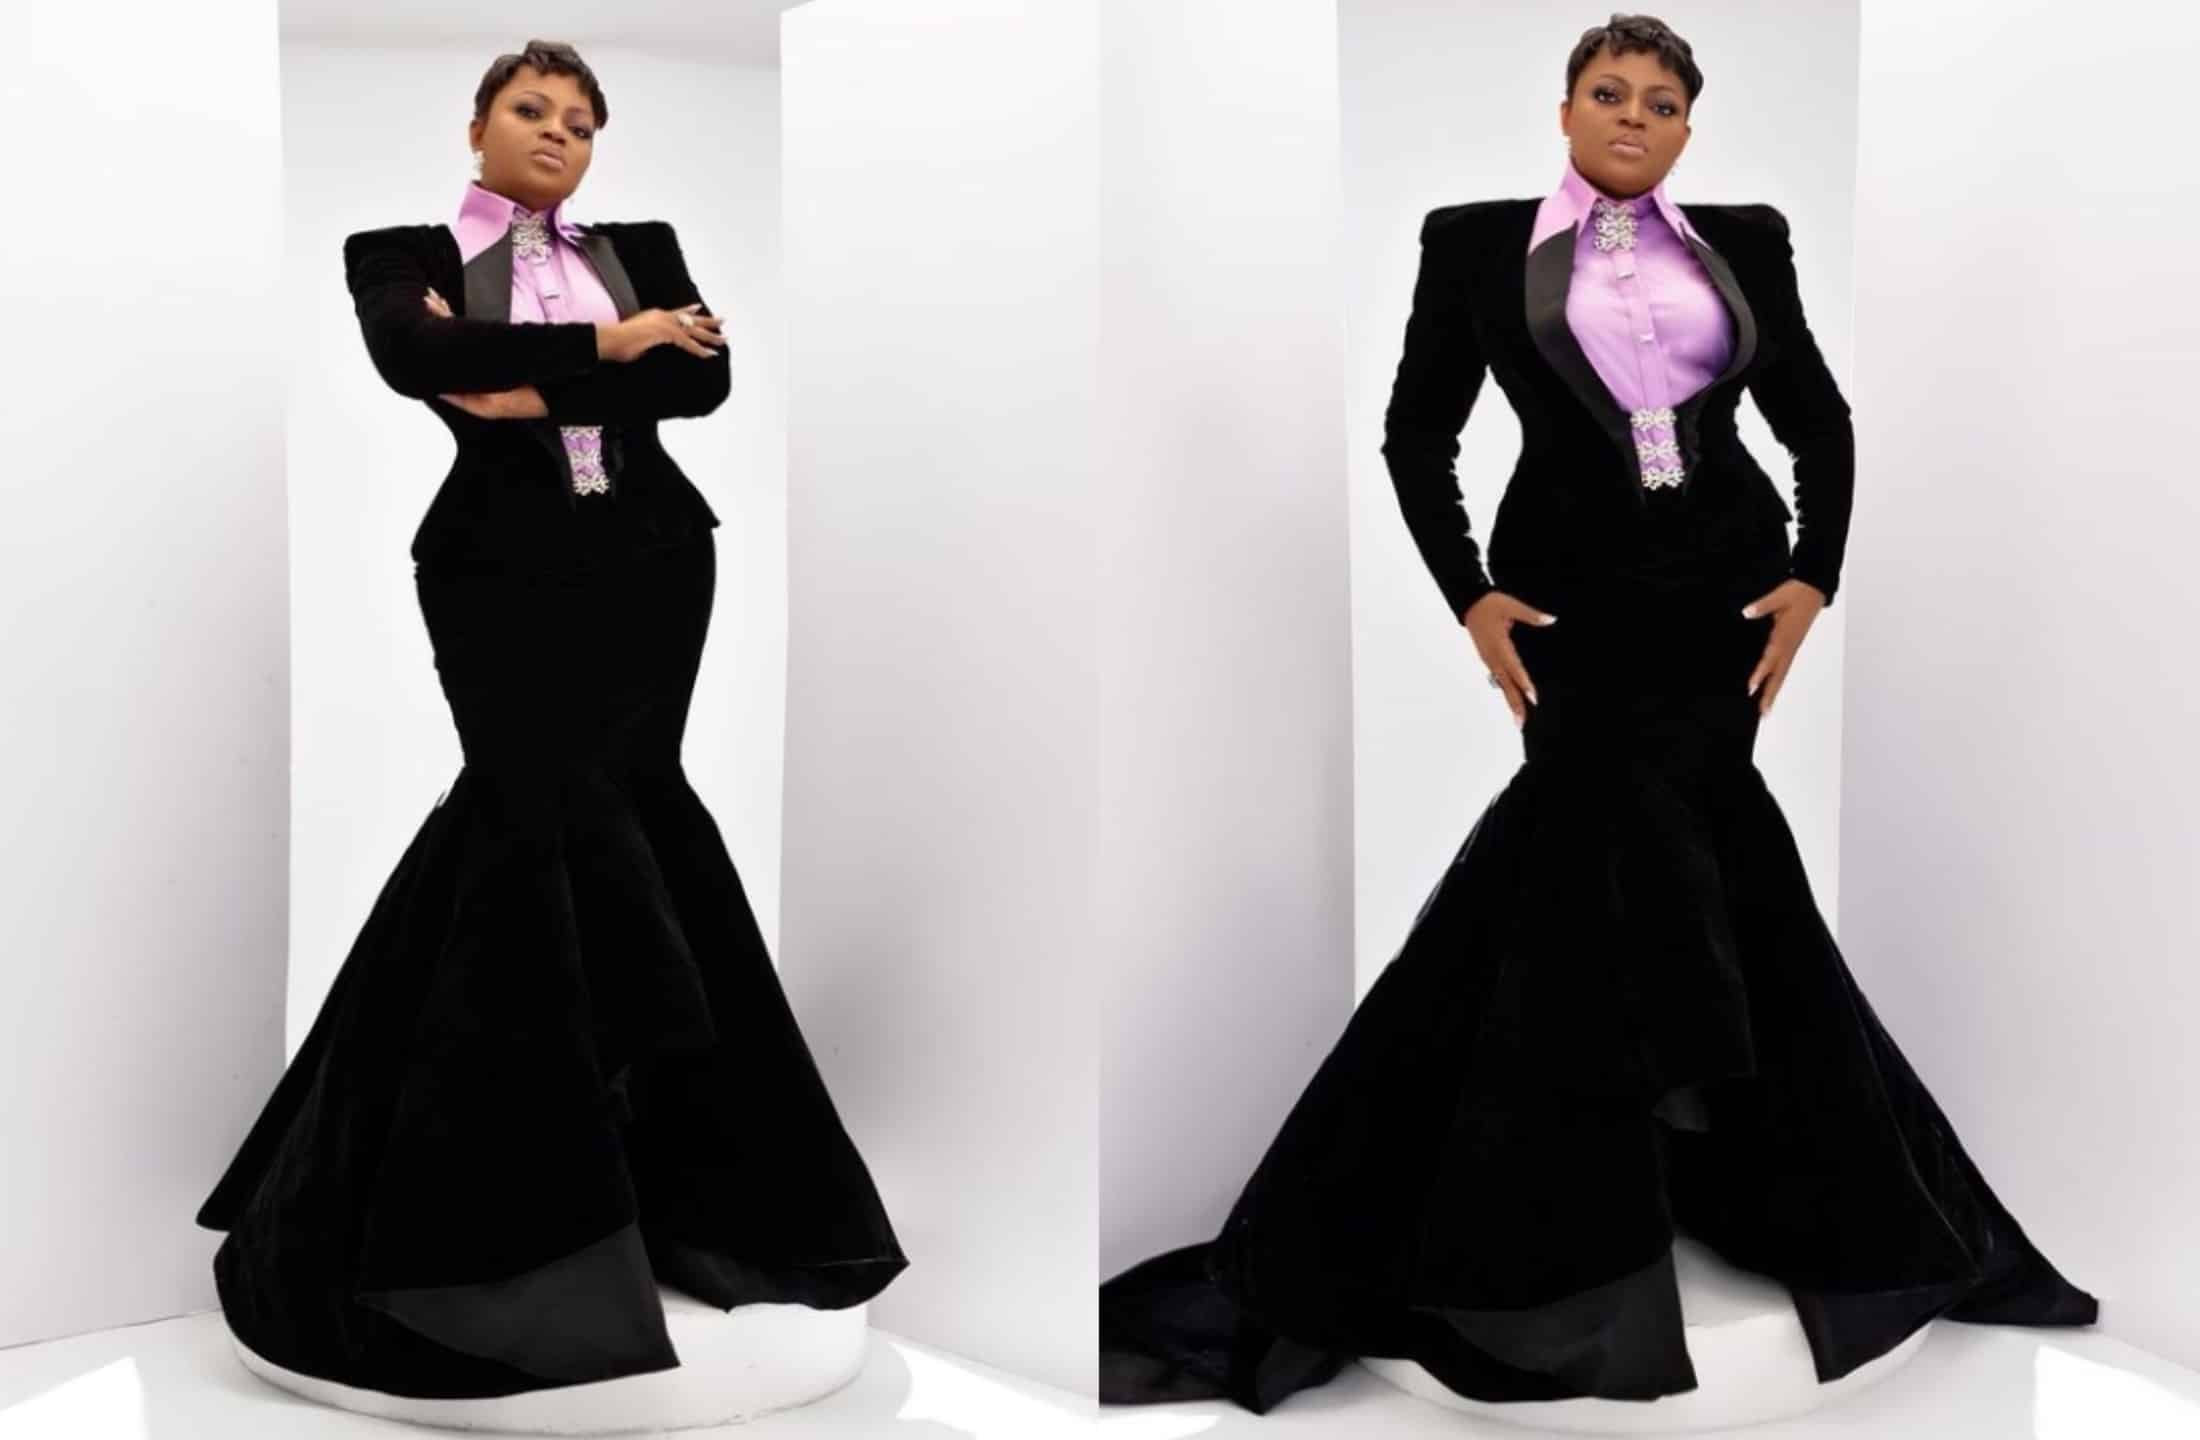 Wumi Toriola, Mo Bimpe, others hail Funke Akindele as she removes husband's name from new project (Video)